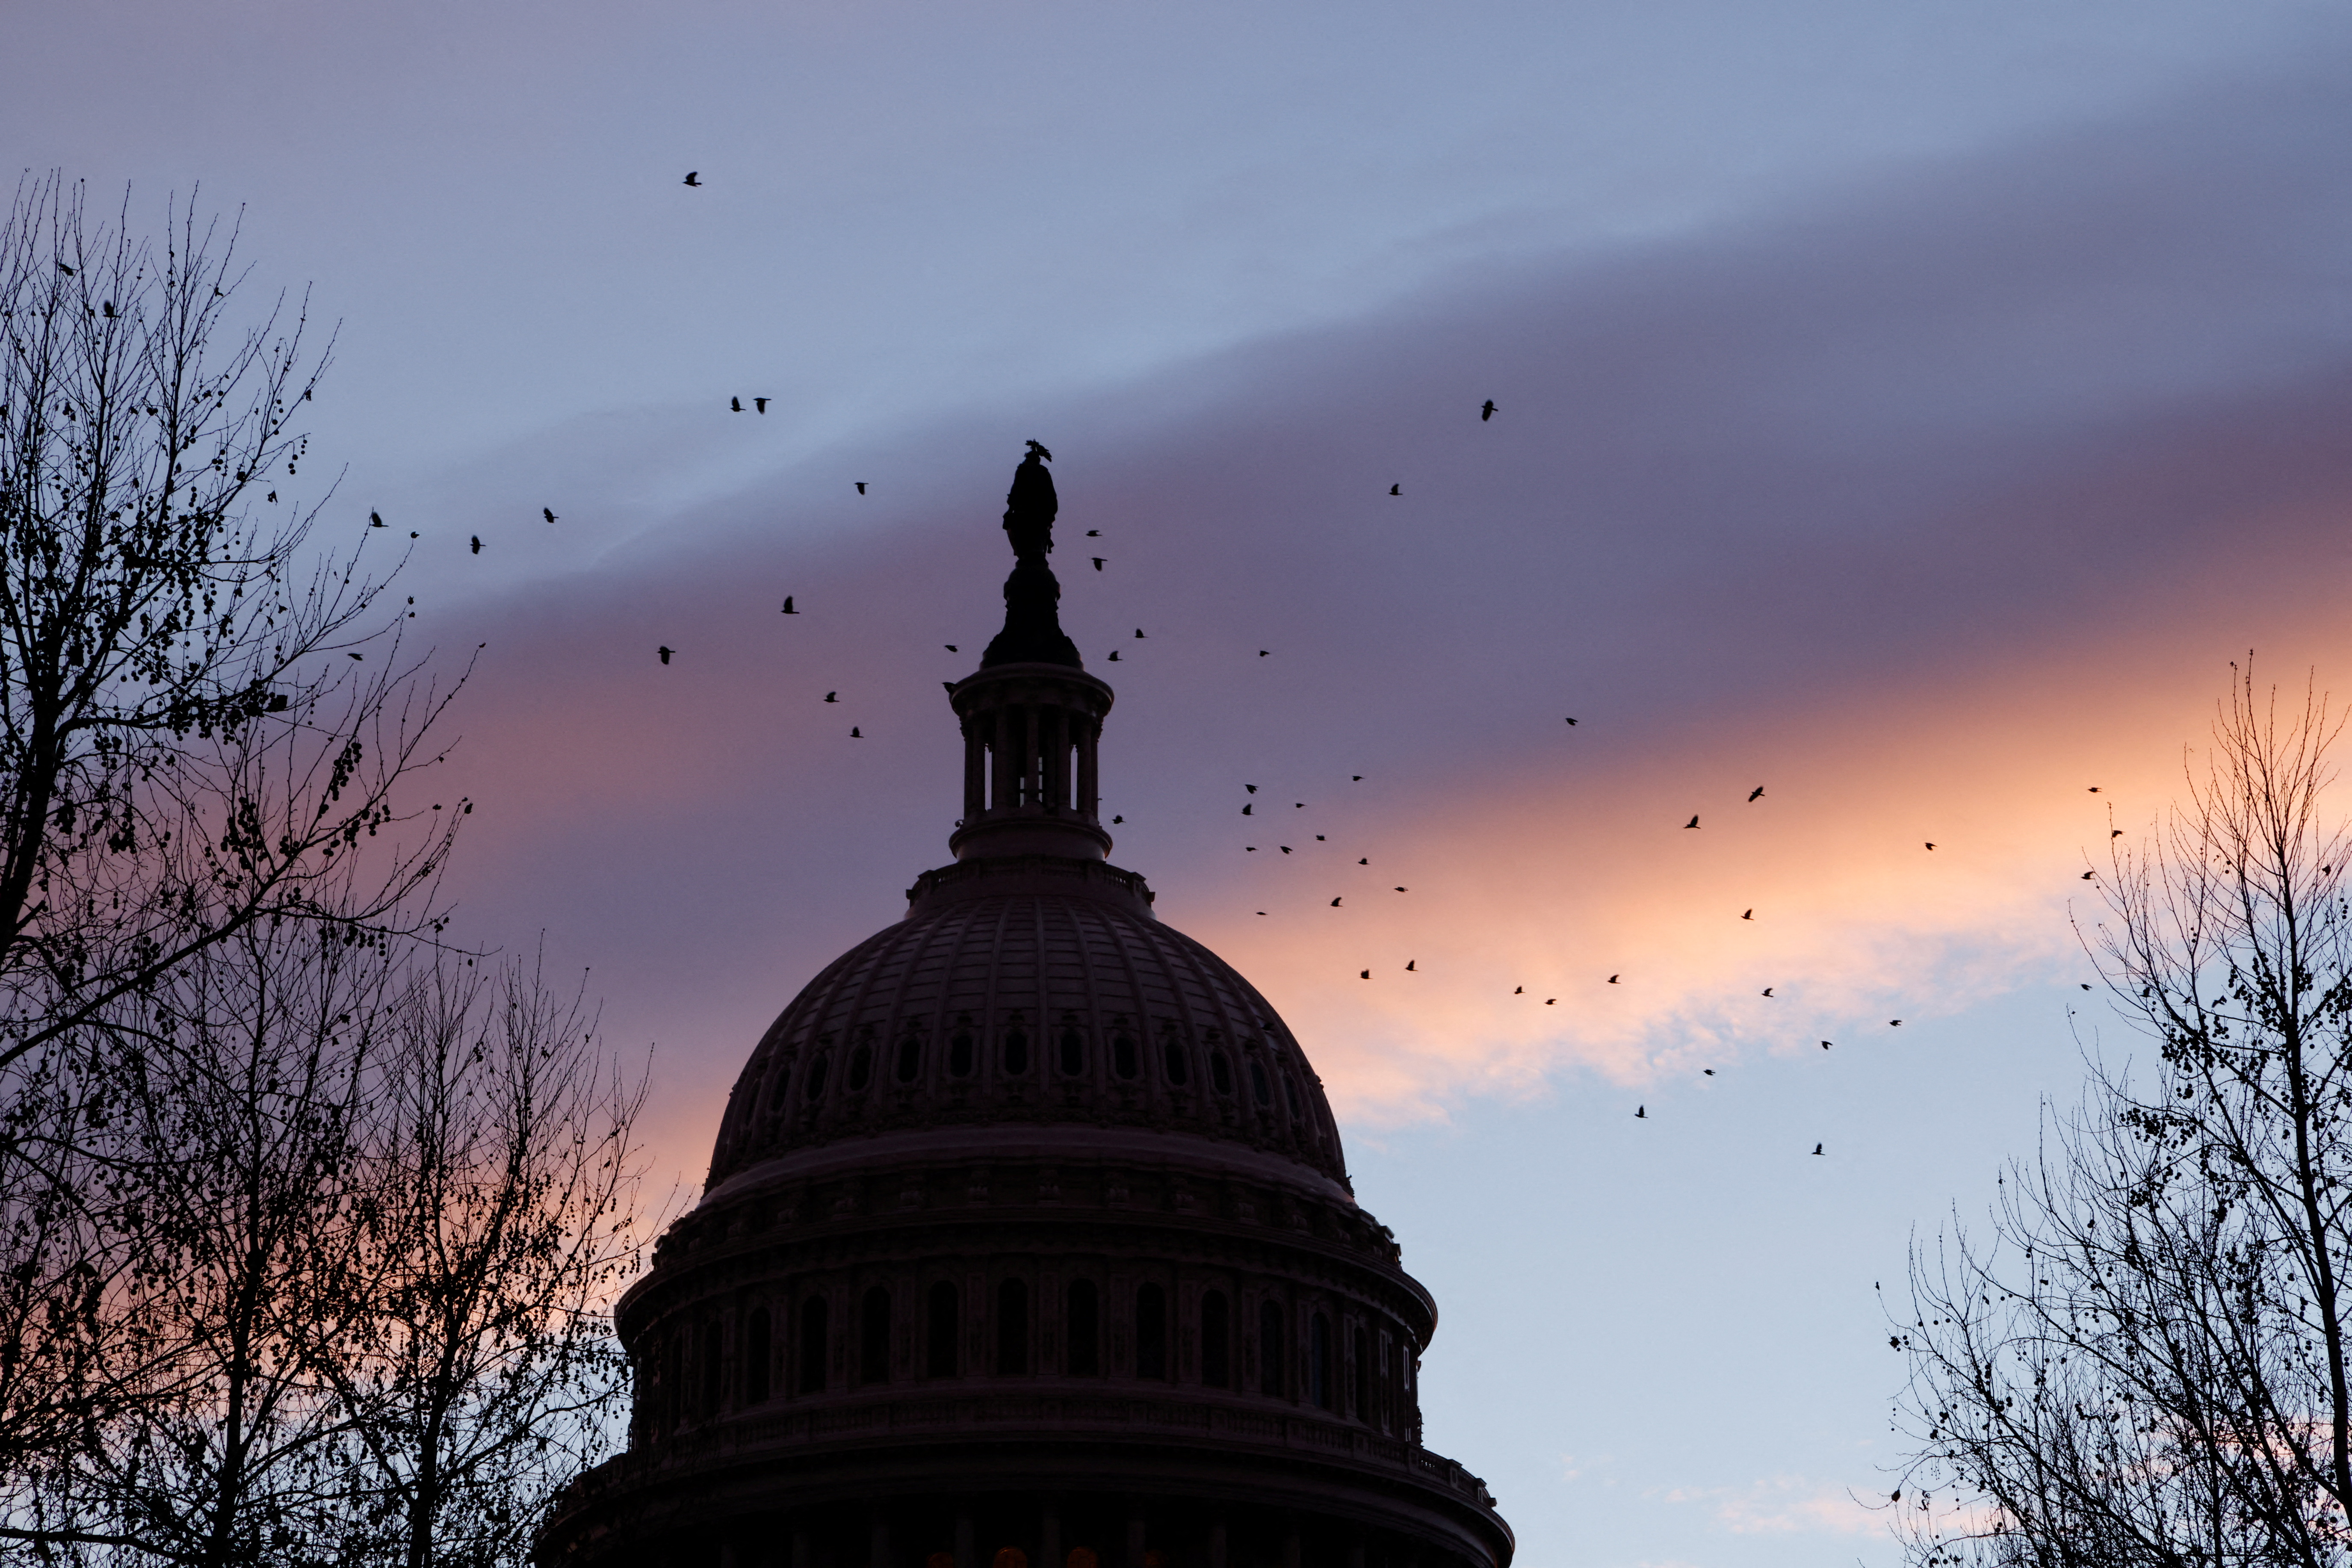 Birds fly next to the dome of the U.S. Capitol at dawn on the first anniversary of the January 6, 2021 attack on the Capitol by supporters of former President Donald Trump, on Capitol Hill in Washington, U.S., January 6, 2022. REUTERS/Jonathan Ernst